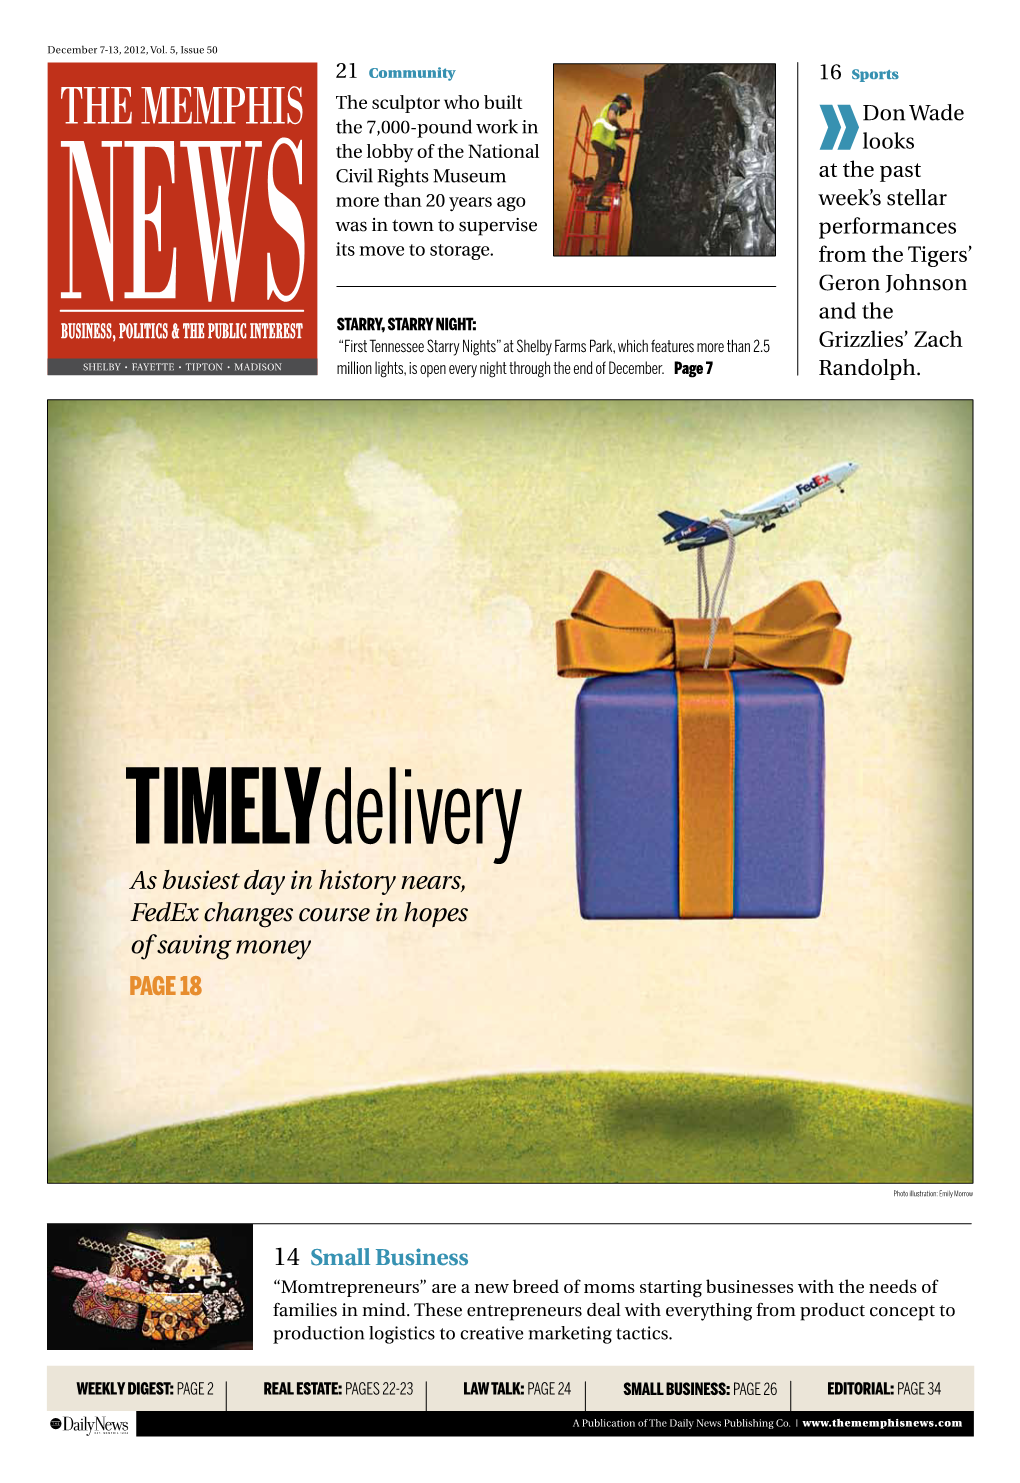 As Busiest Day in History Nears, Fedex Changes Course in Hopes of Saving Money Page 18